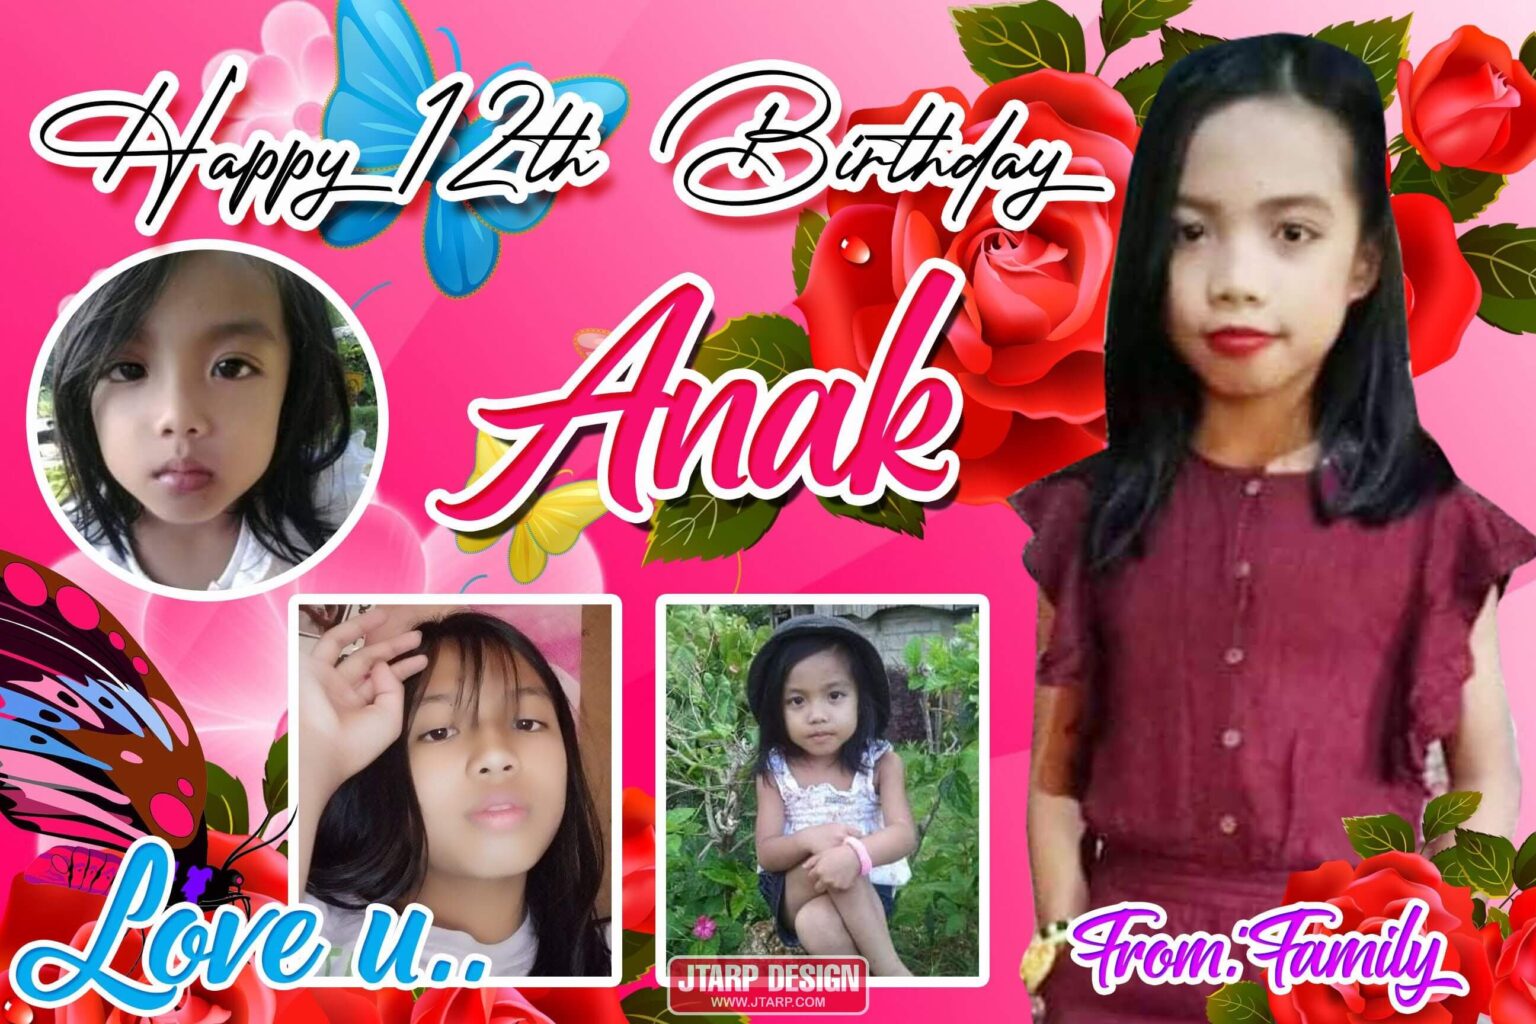 2x3 Happy 12th Birthday Anak Flower and Butterfly Design 1